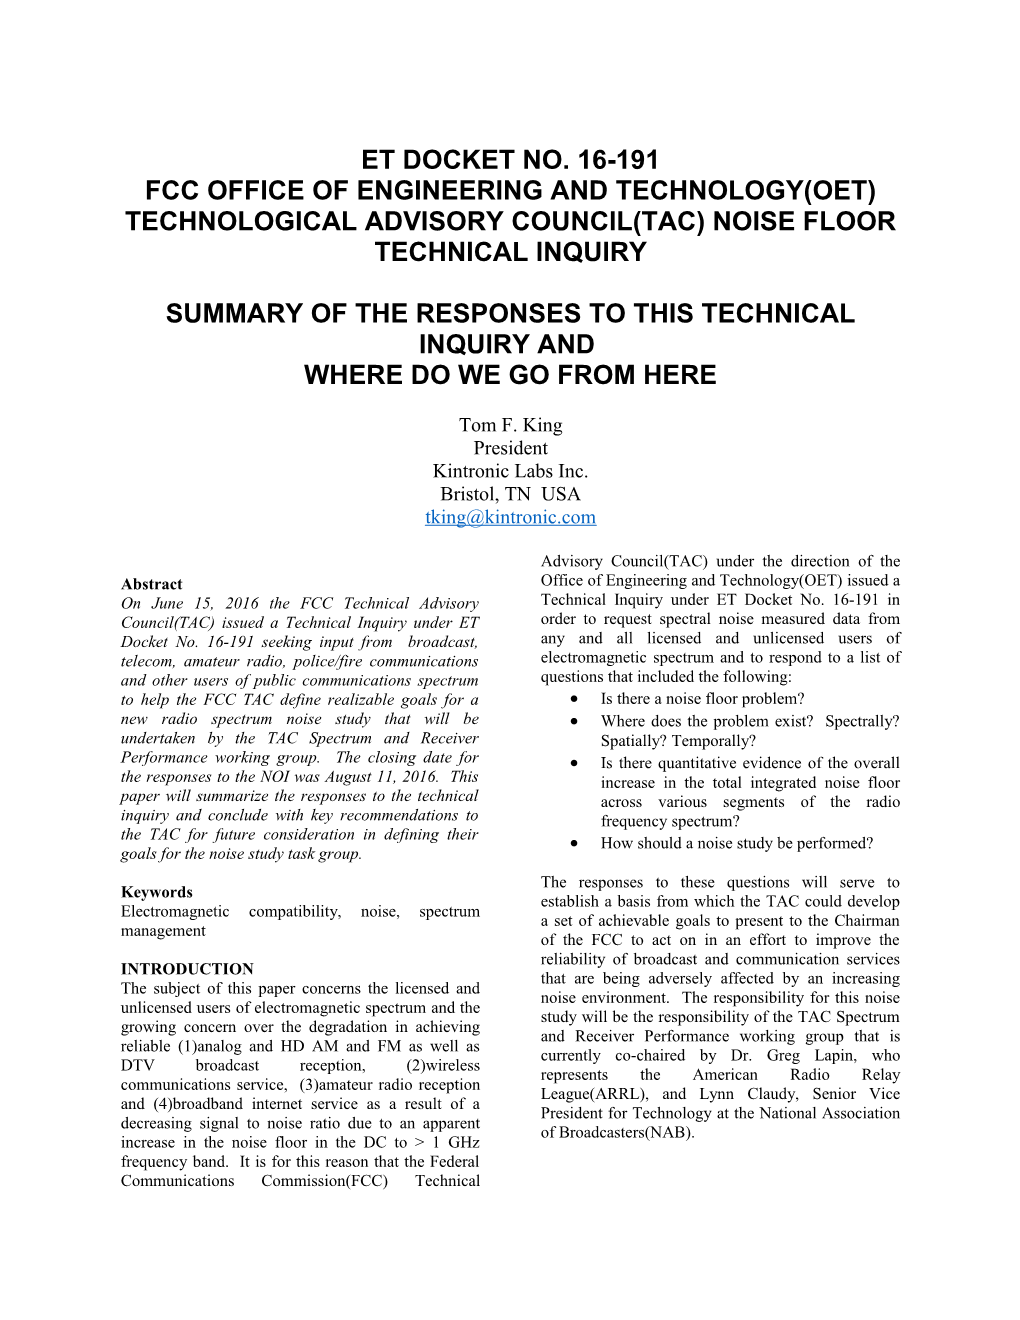 Fcc Office of Engineering and Technology(Oet)